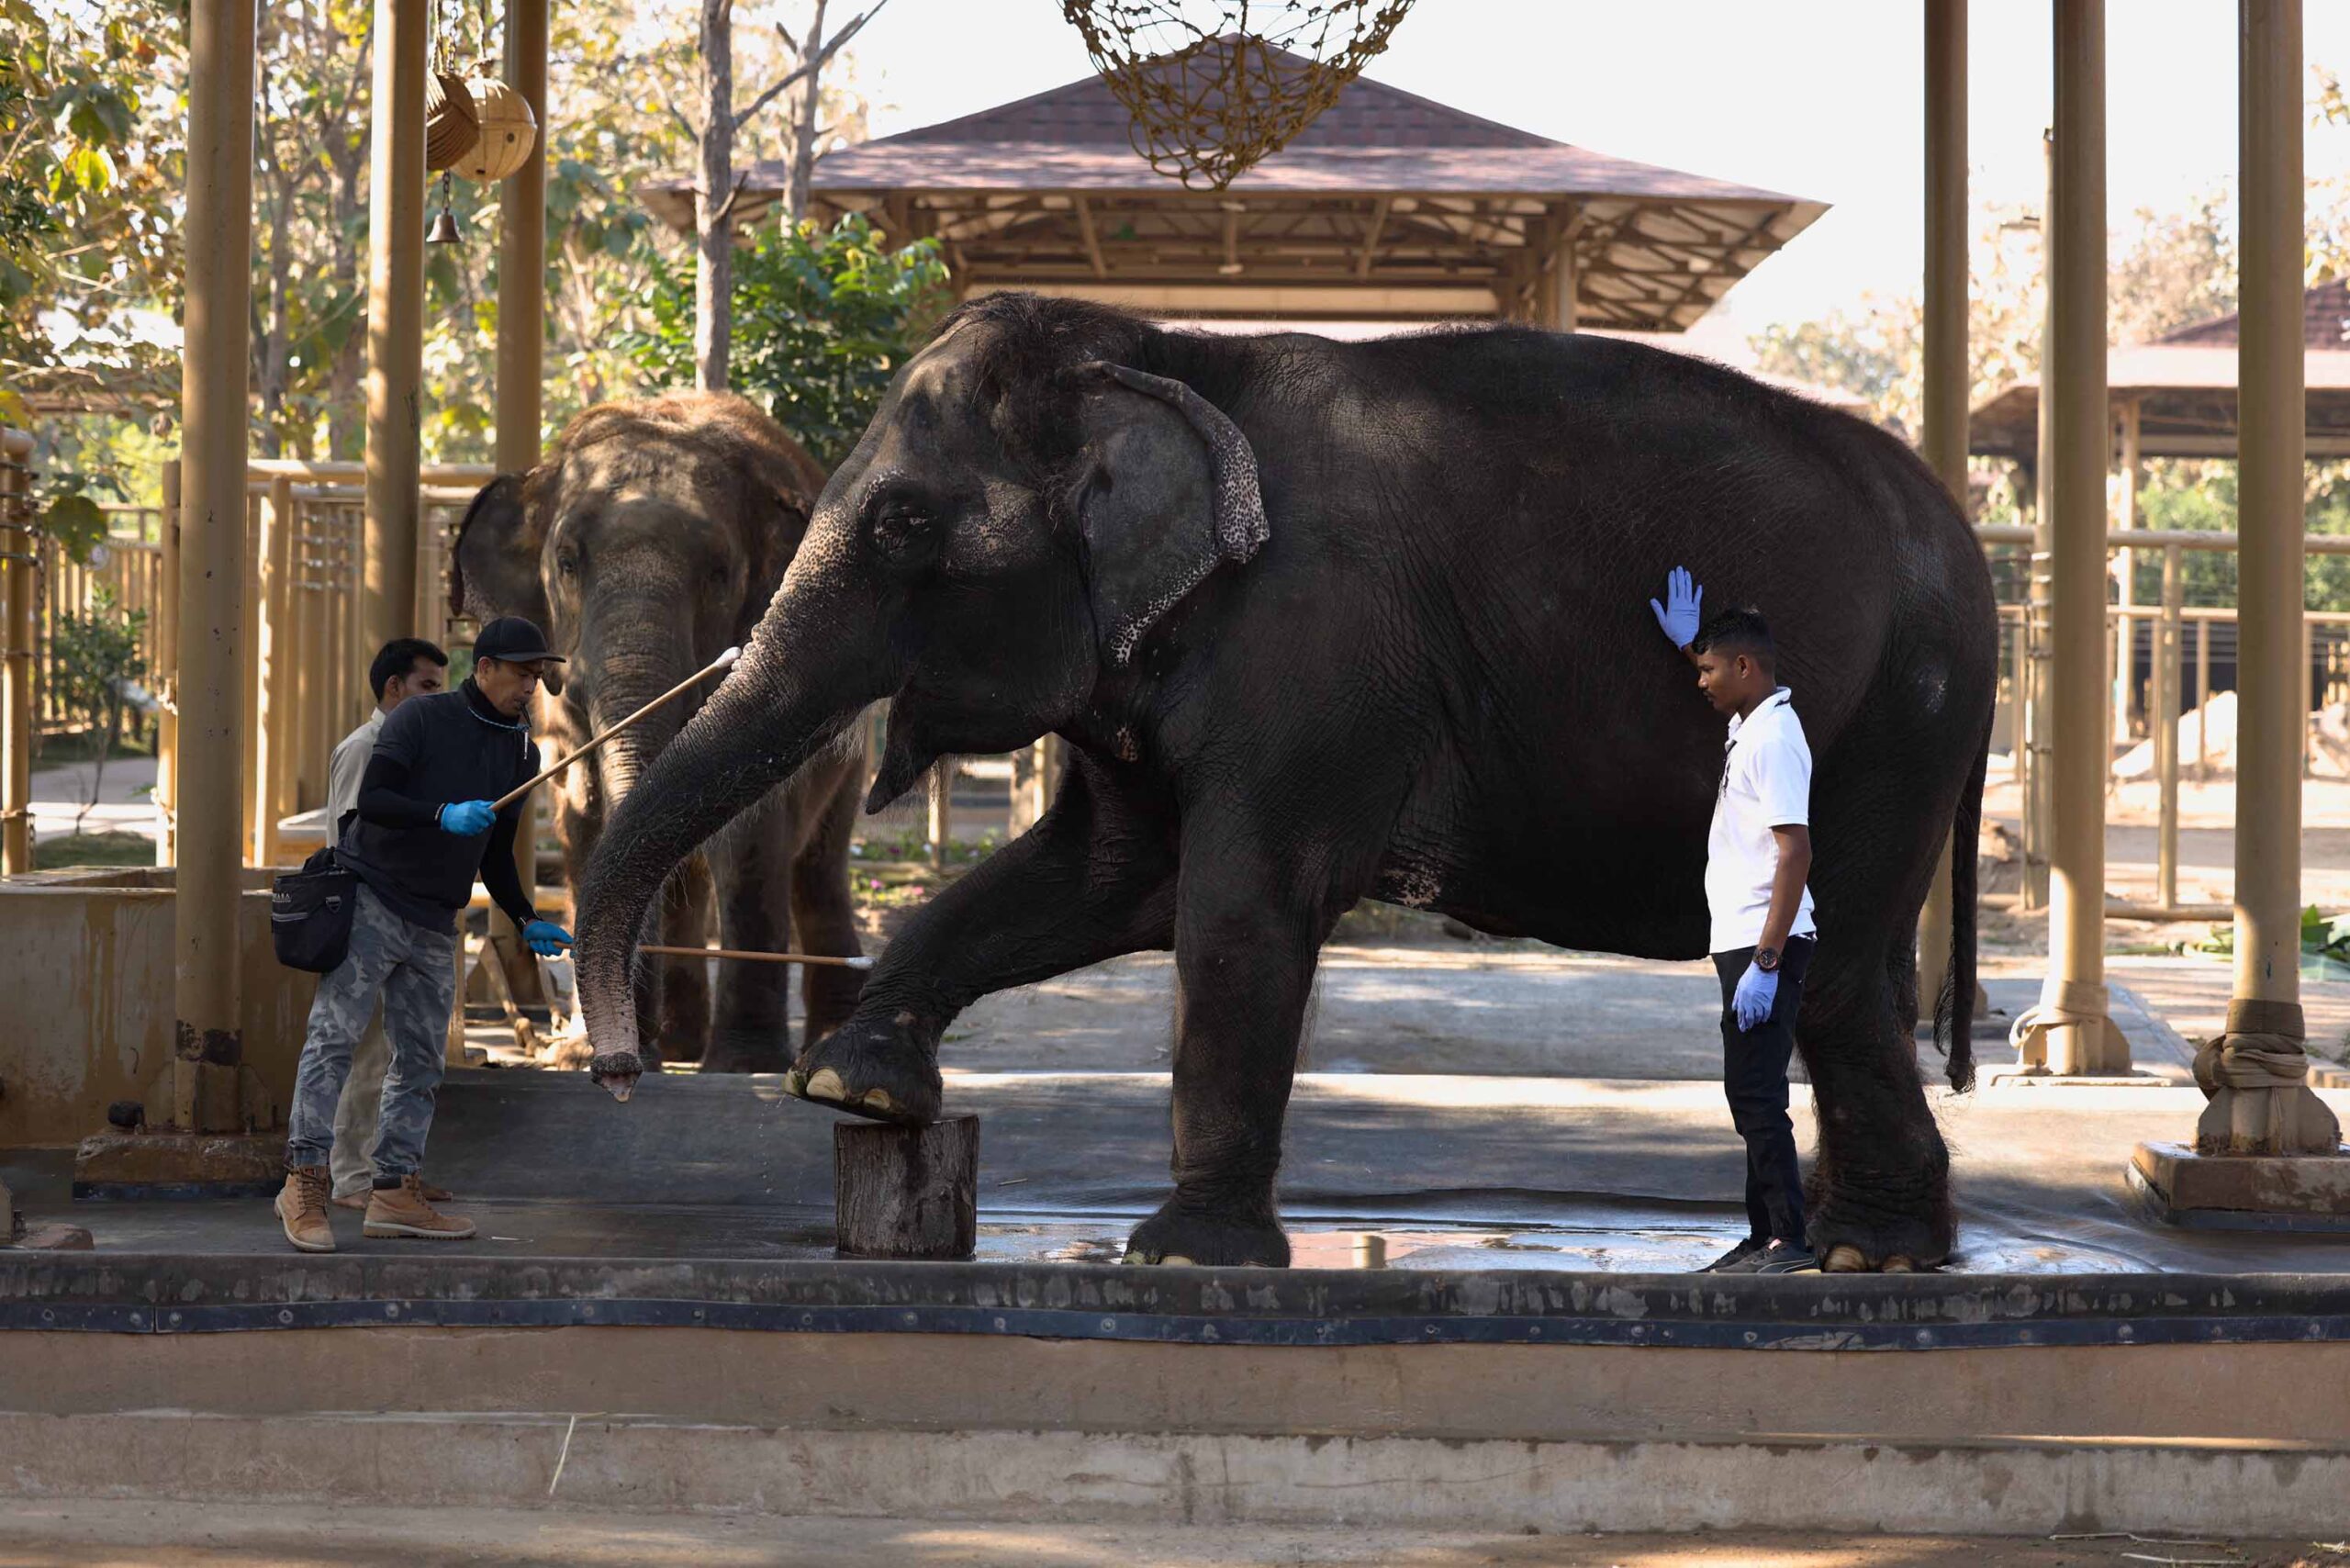 An elephant is washed and attended to at Vantara’s Elephant Centre in Jamnagar, Gujarat